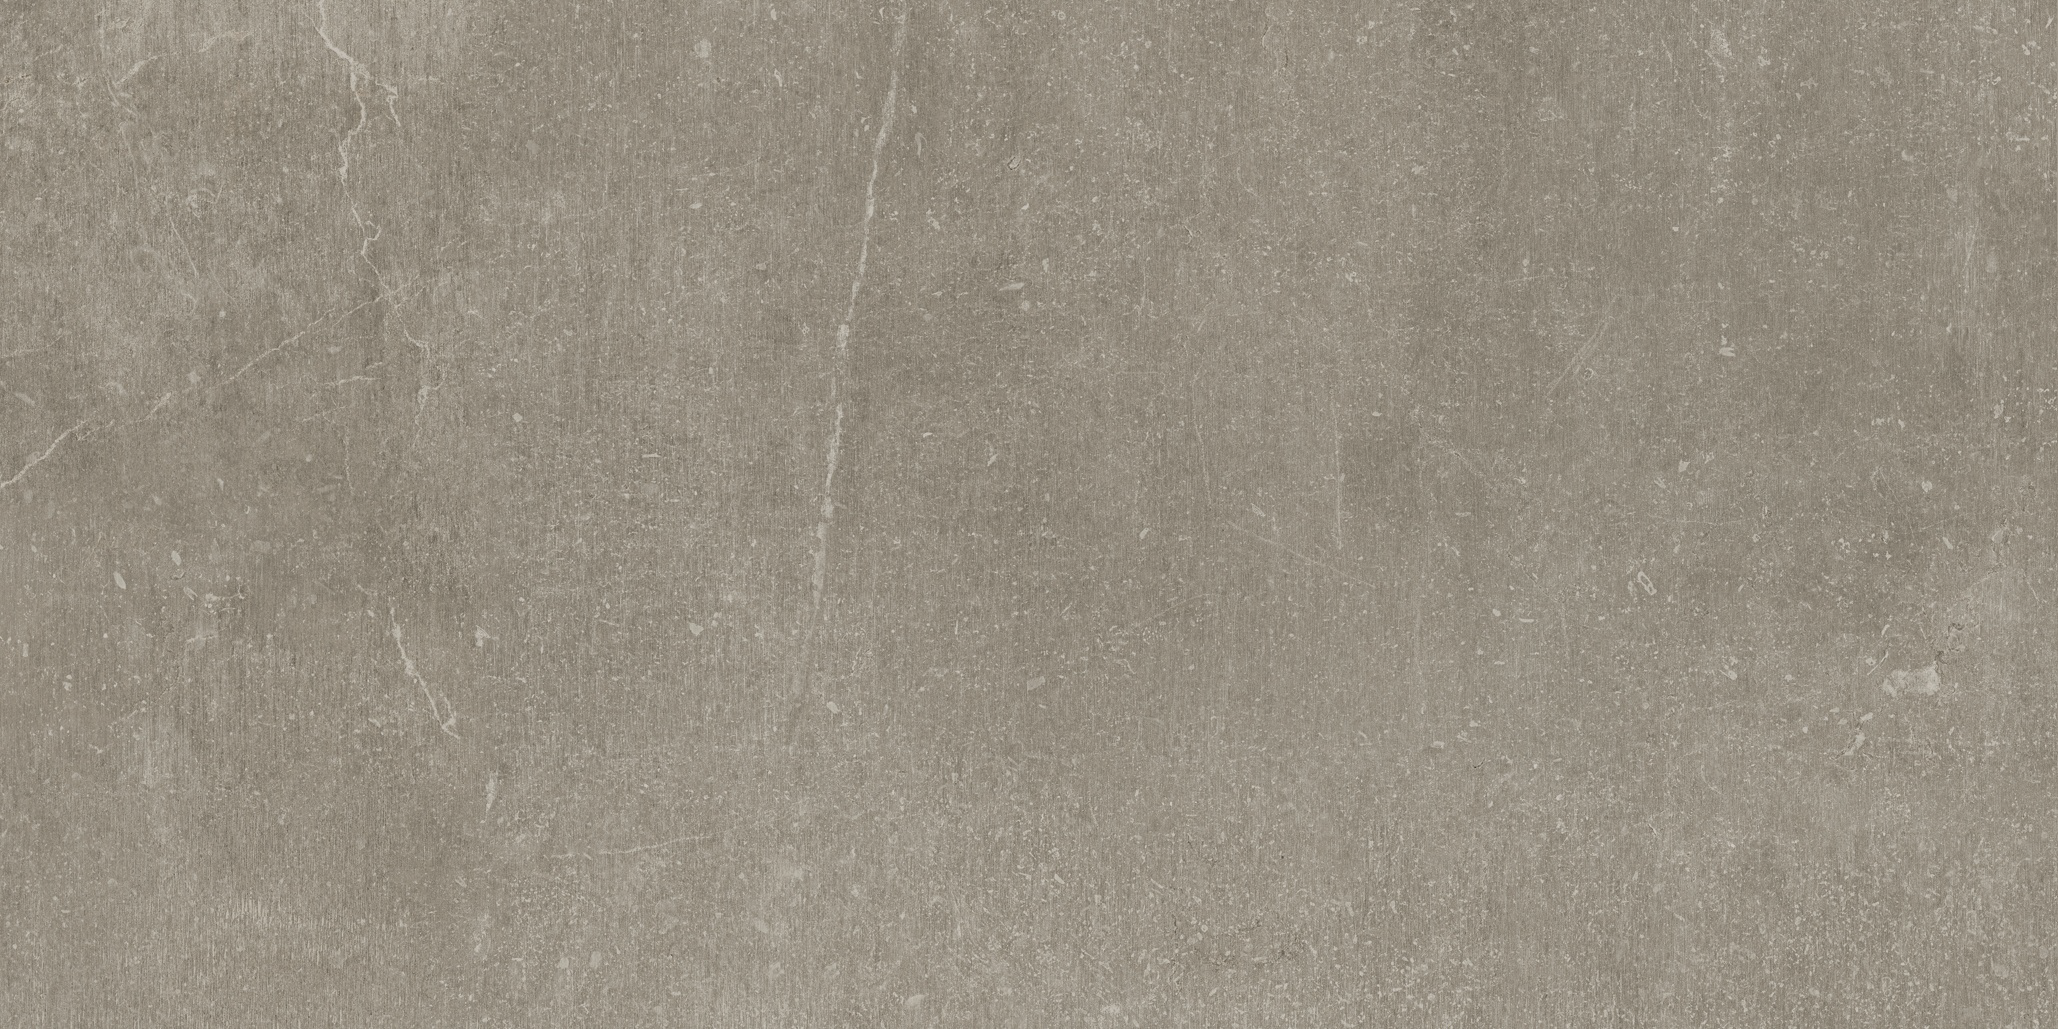 clay pattern glazed porcelain field tile from nexus anatolia collection distributed by surface group international matte finish pressed edge 16x32 rectangle shape